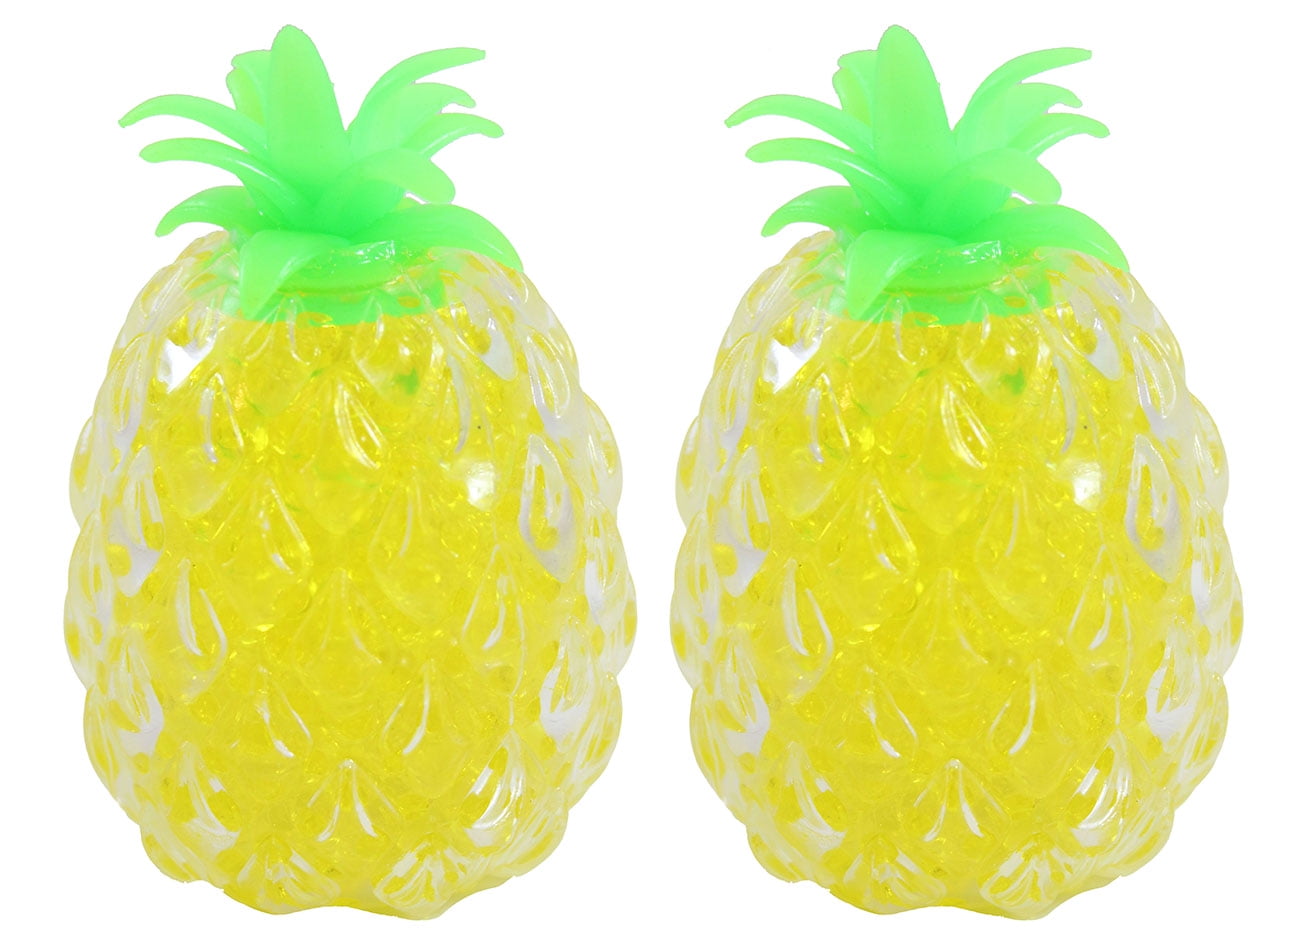 FUZOOS PINEAPPLE Stress Relief Jelly Ball Kids Gift Squishy Sensory Toy TOB36421 